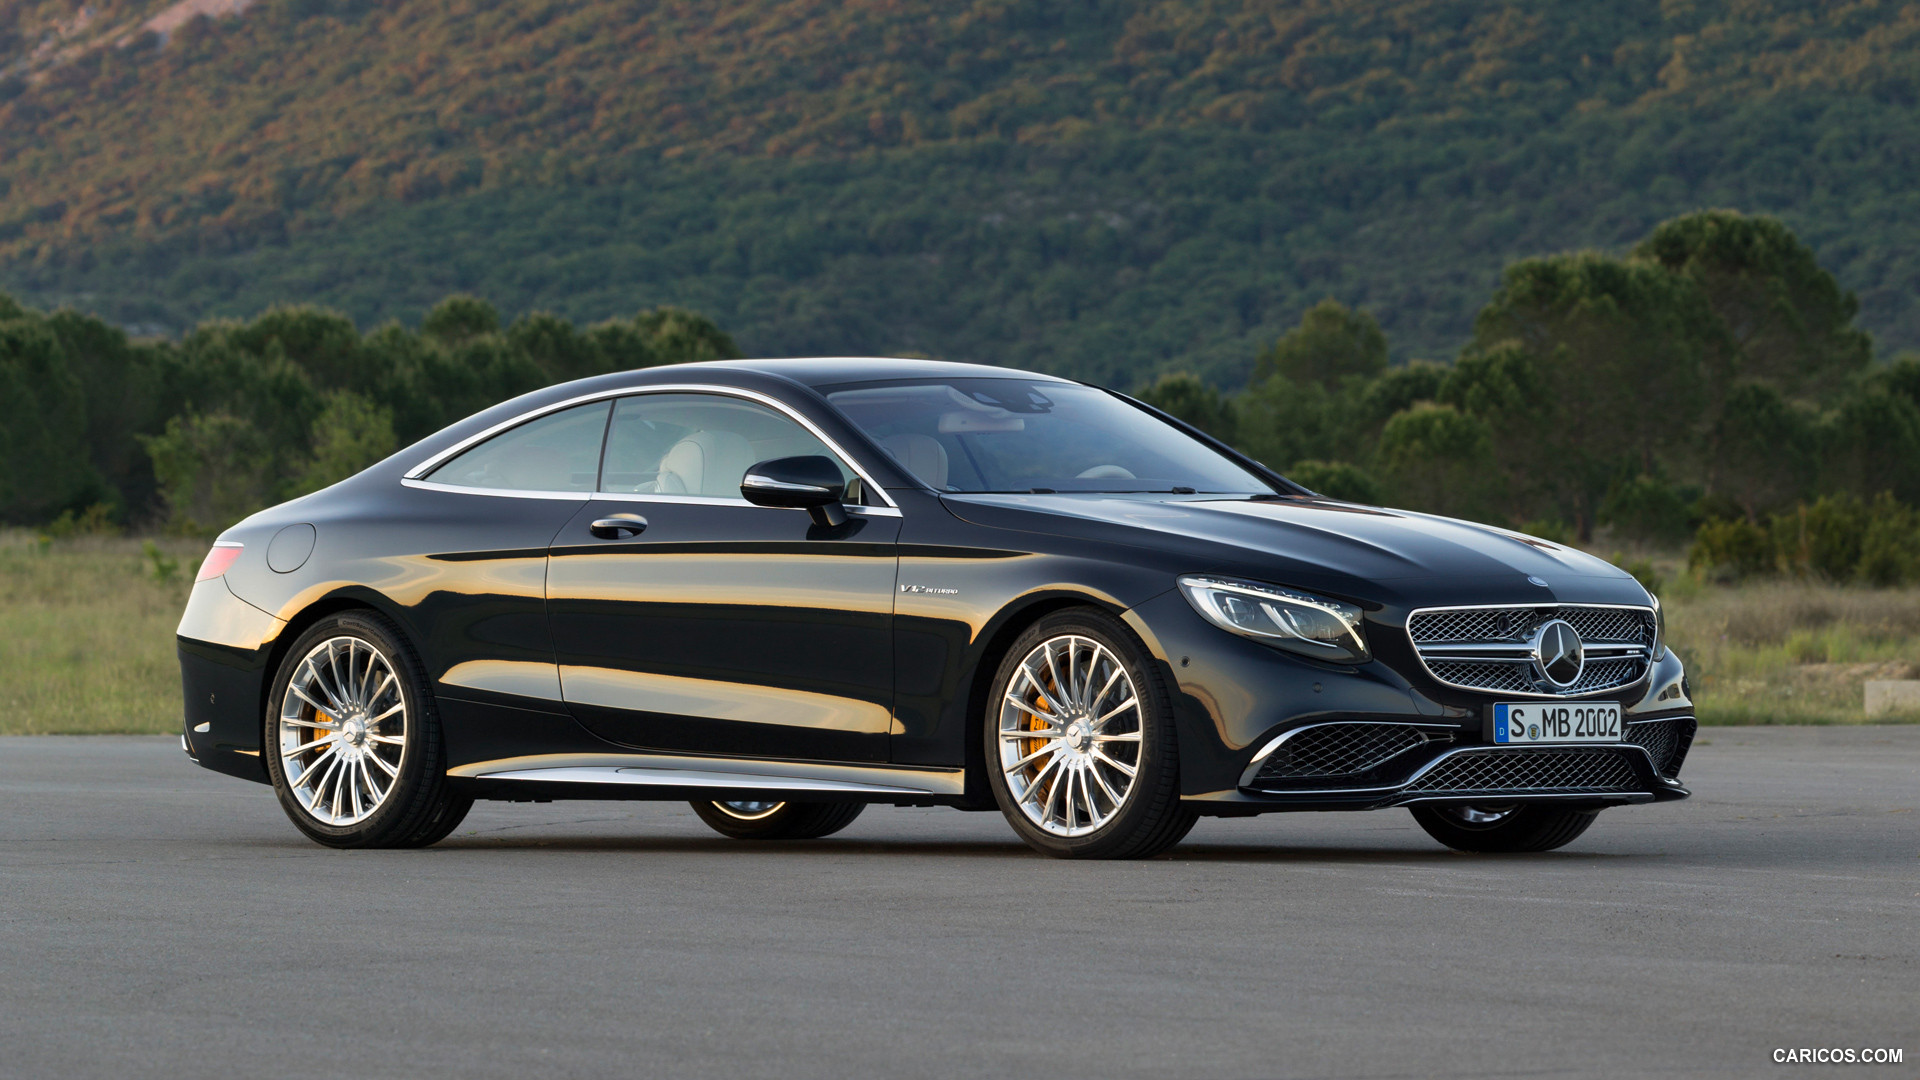 2015 Mercedes-Benz S65 AMG Coupe (Anthracite Blue) - Side, #16 of 101